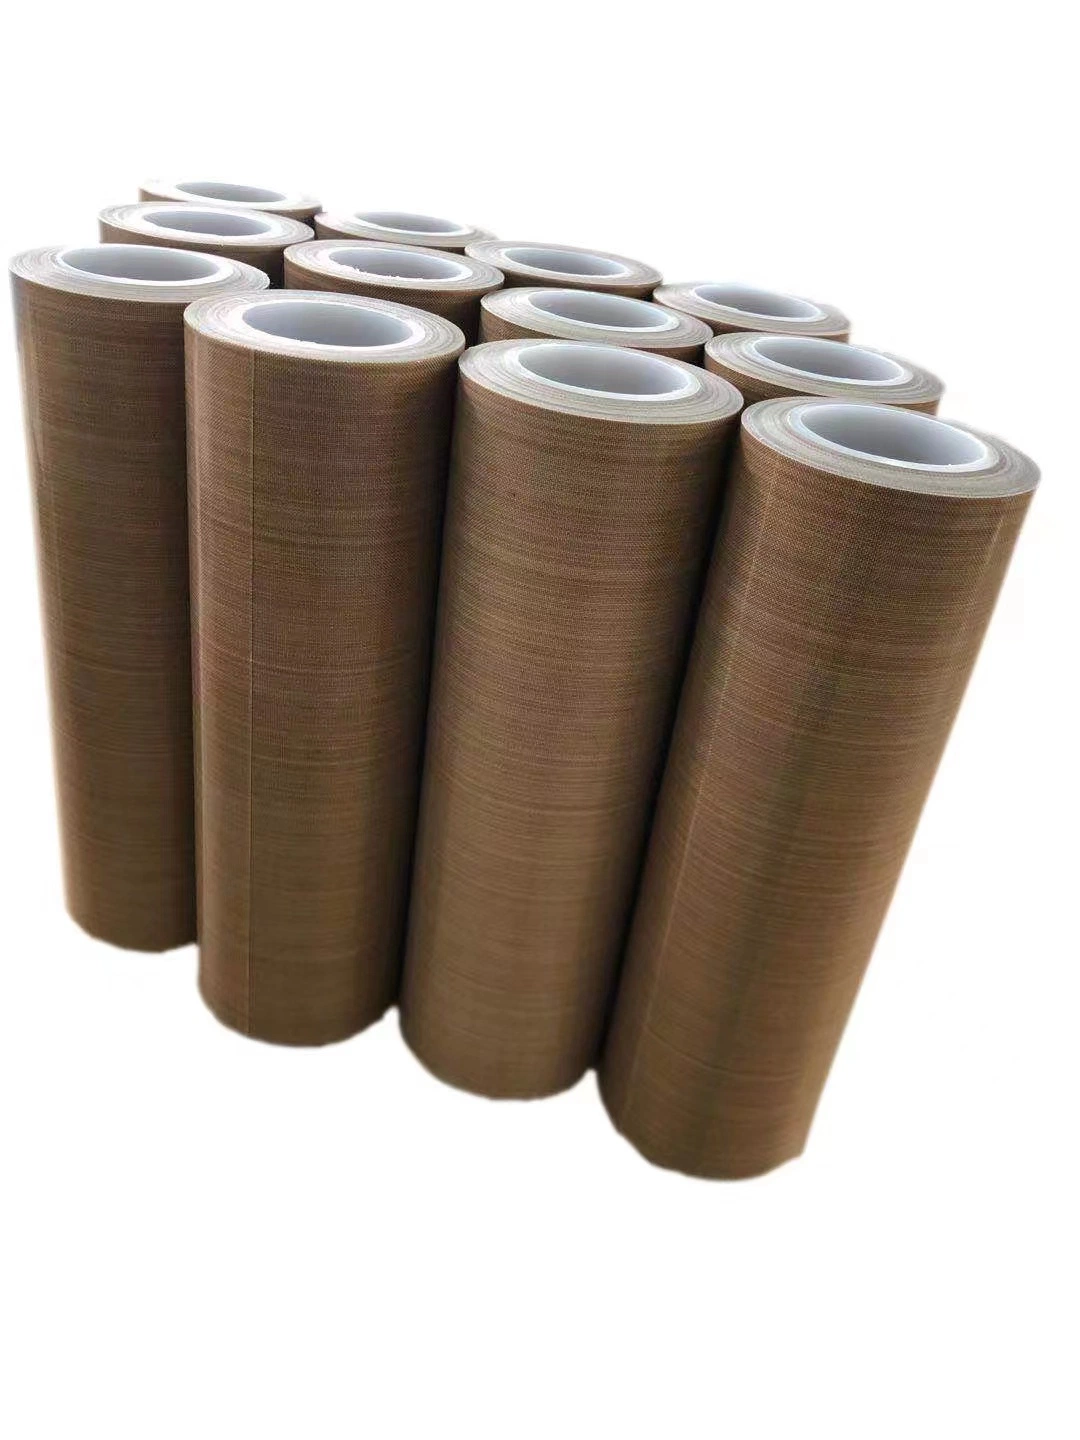 0.08mm 0.09mm 0.11mm 0.13mm 0.18mm 0.25mm Wall Thick PTFE Adhesive Tape with or Without Liner Paper